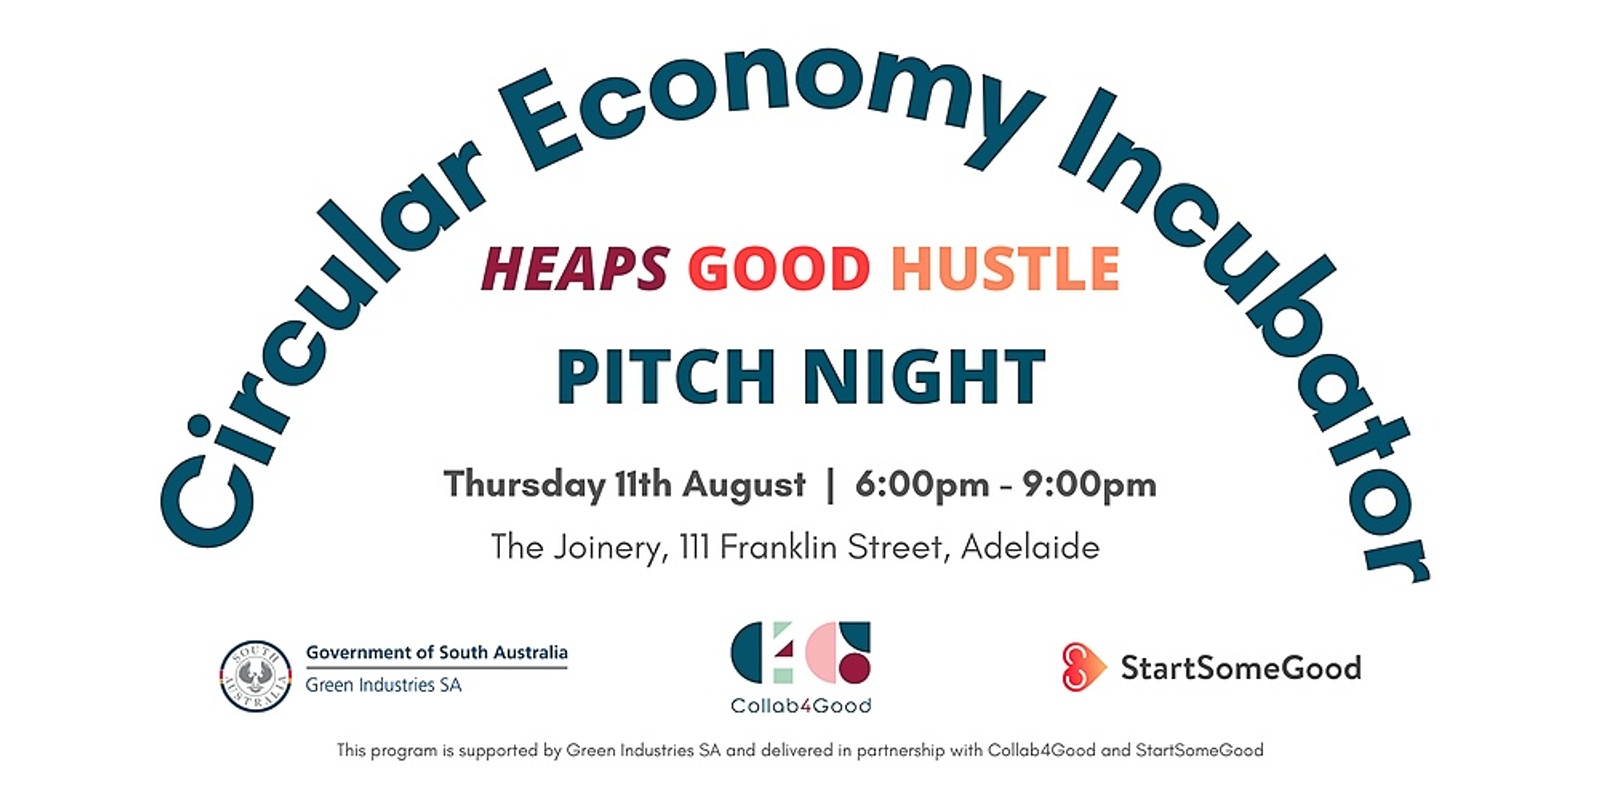 Banner image for Heaps Good Hustle Circular Economy Pitch Night